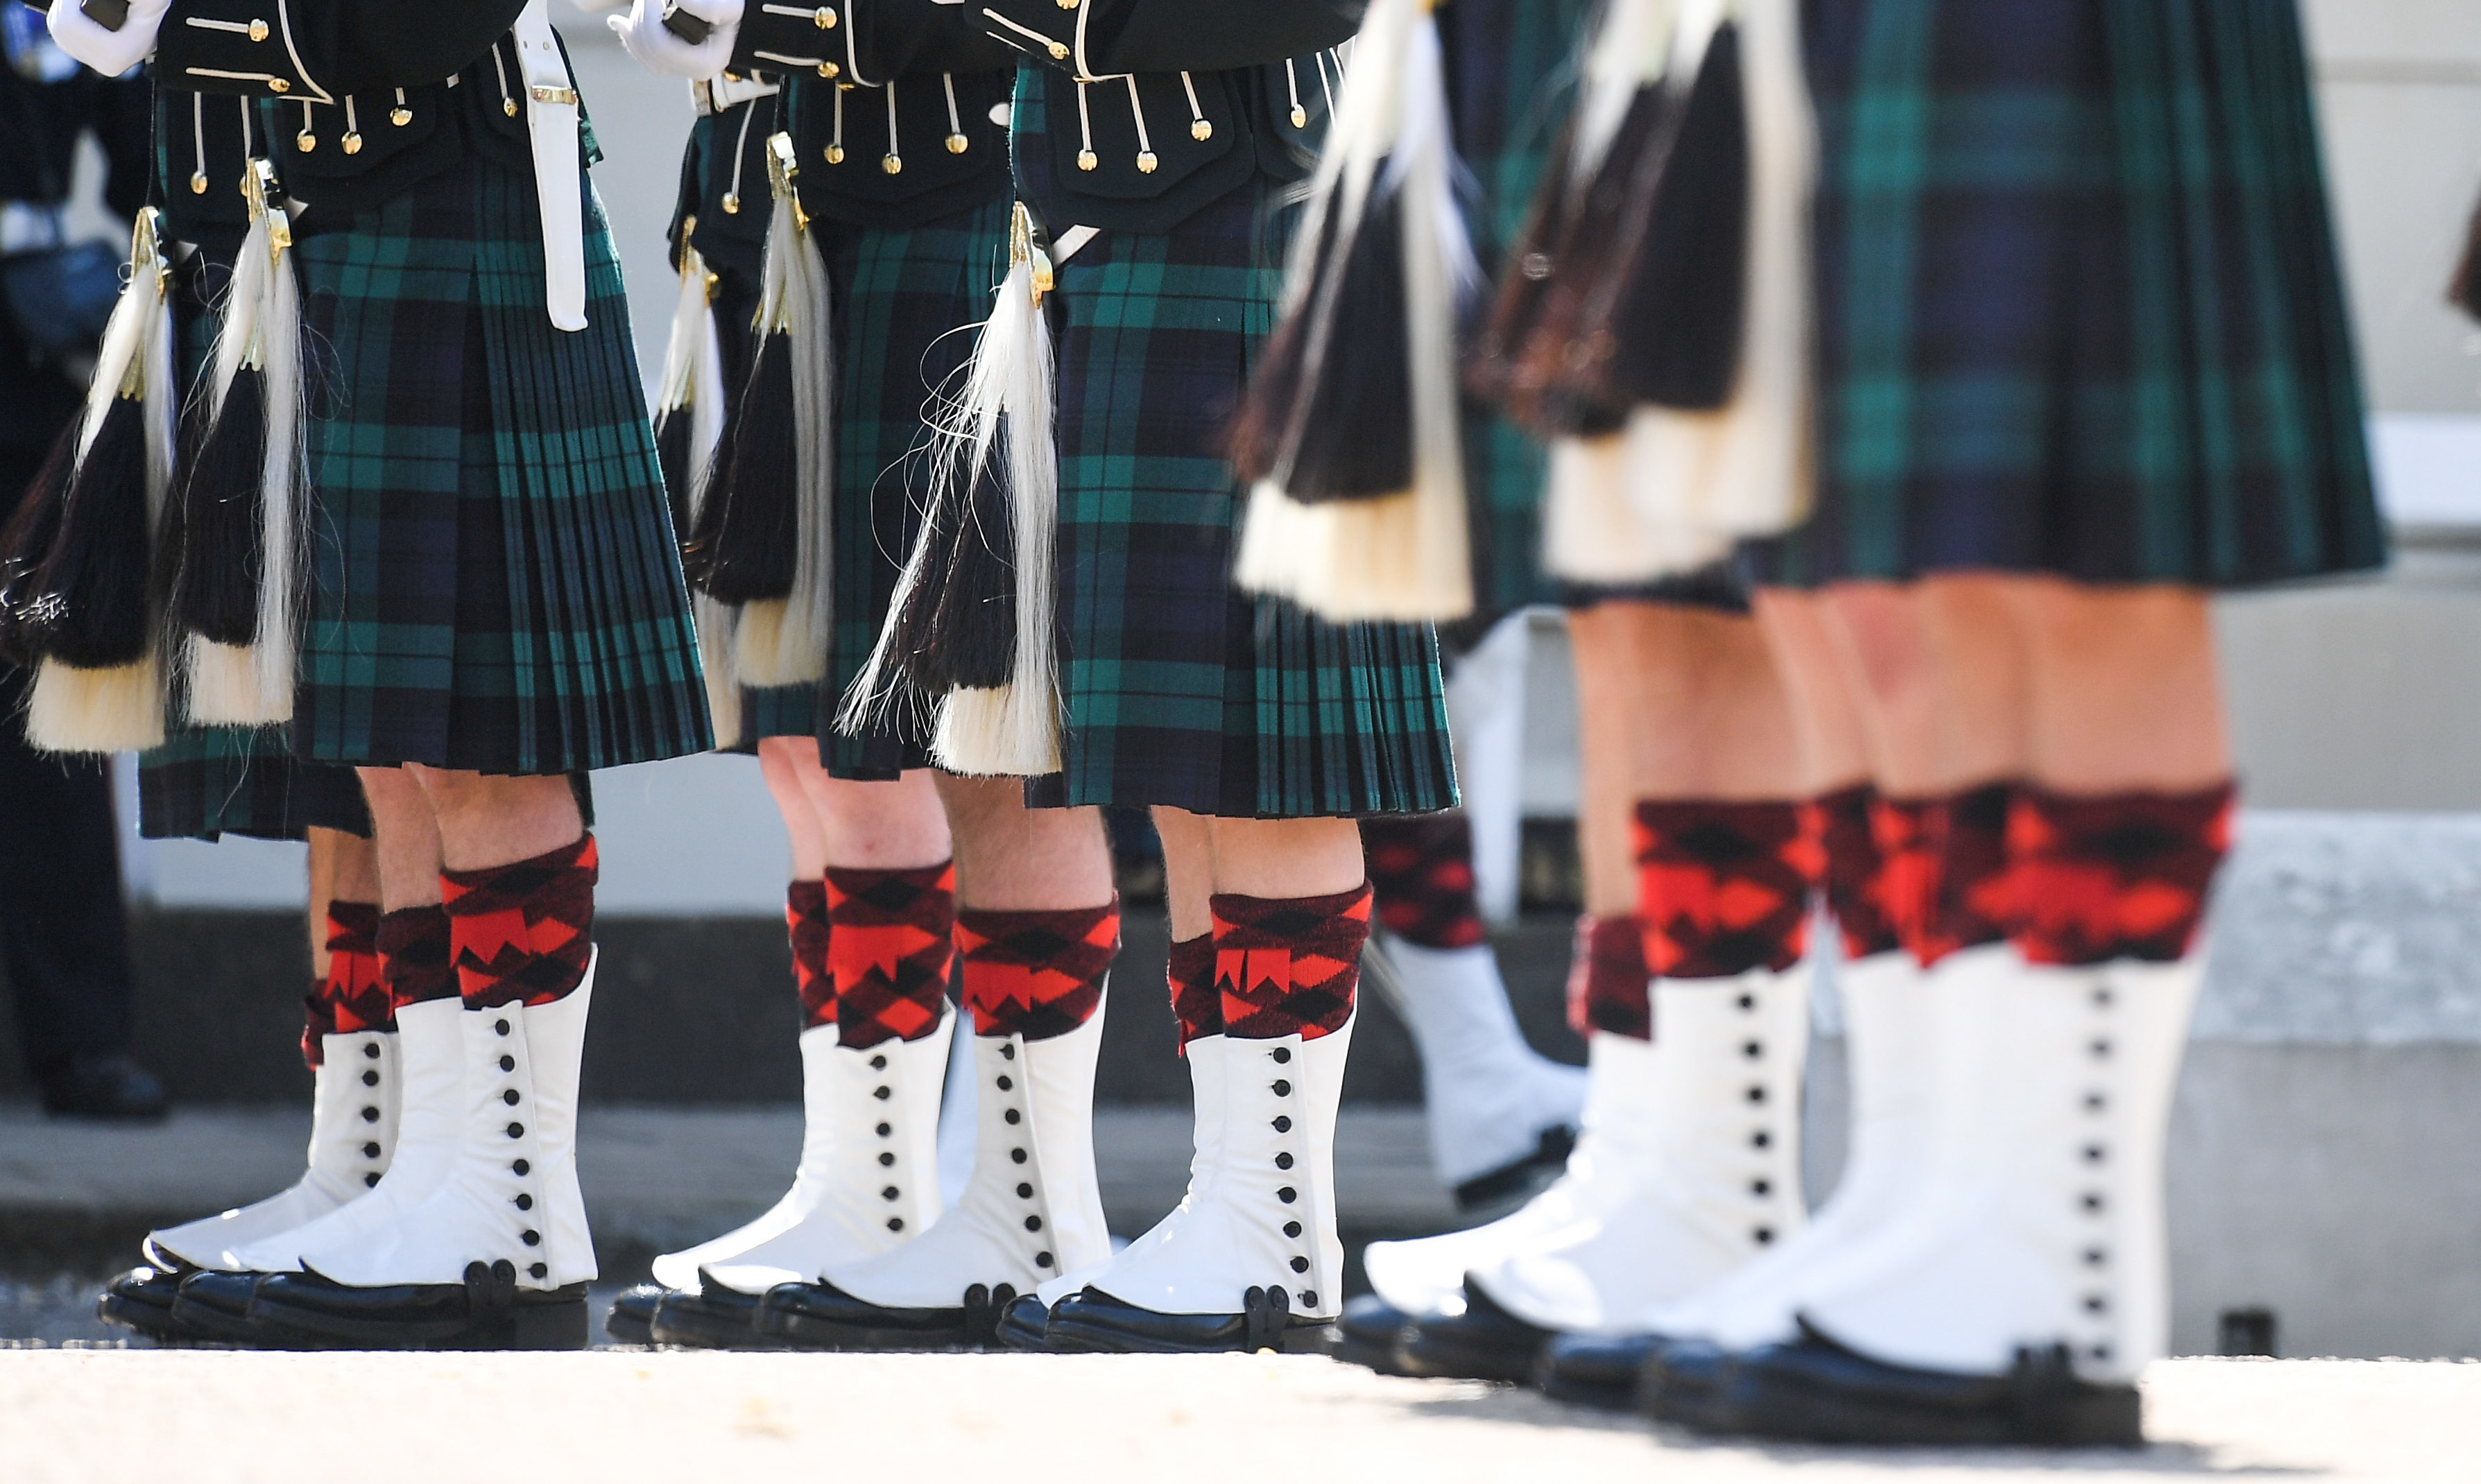 The government upskirting ban will apply to kilts.